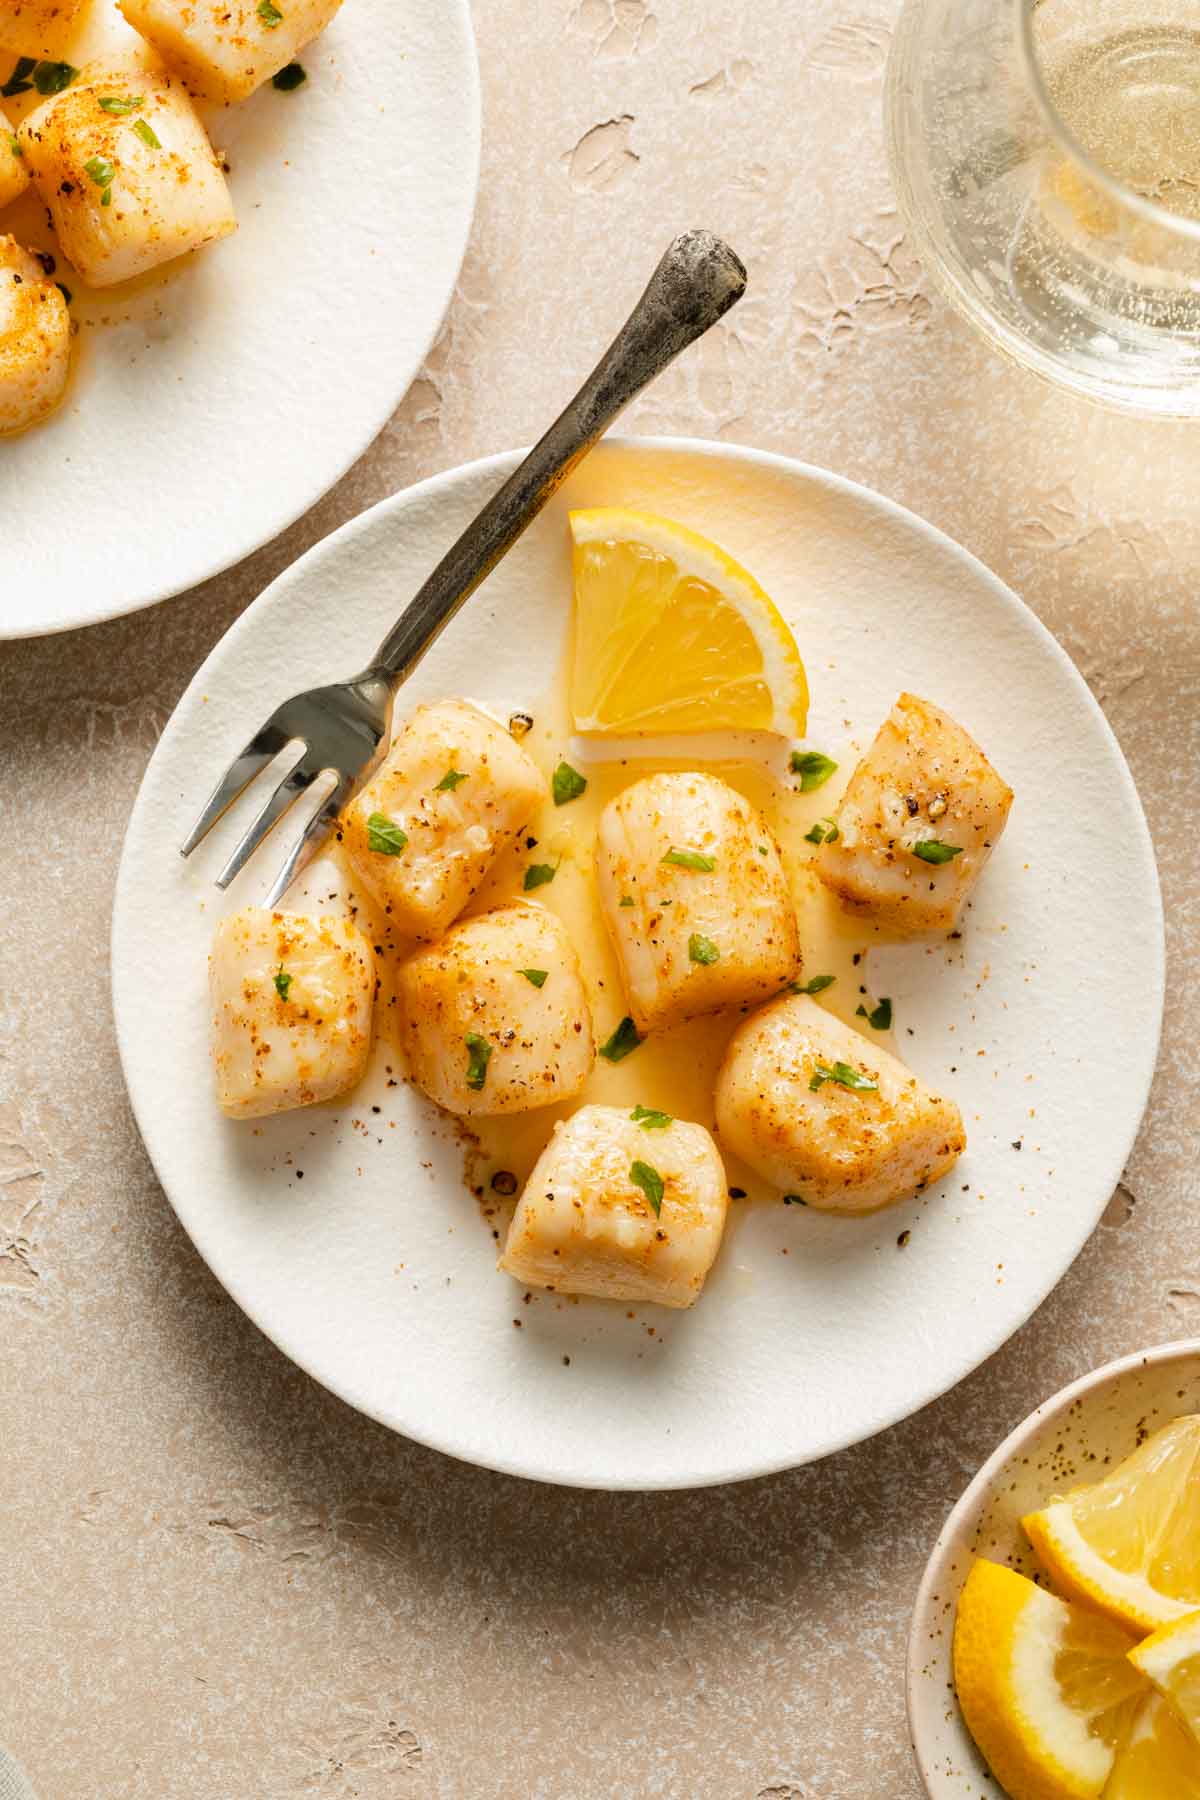 Scallops topped with melted butter and chopped parsley on a white plate.